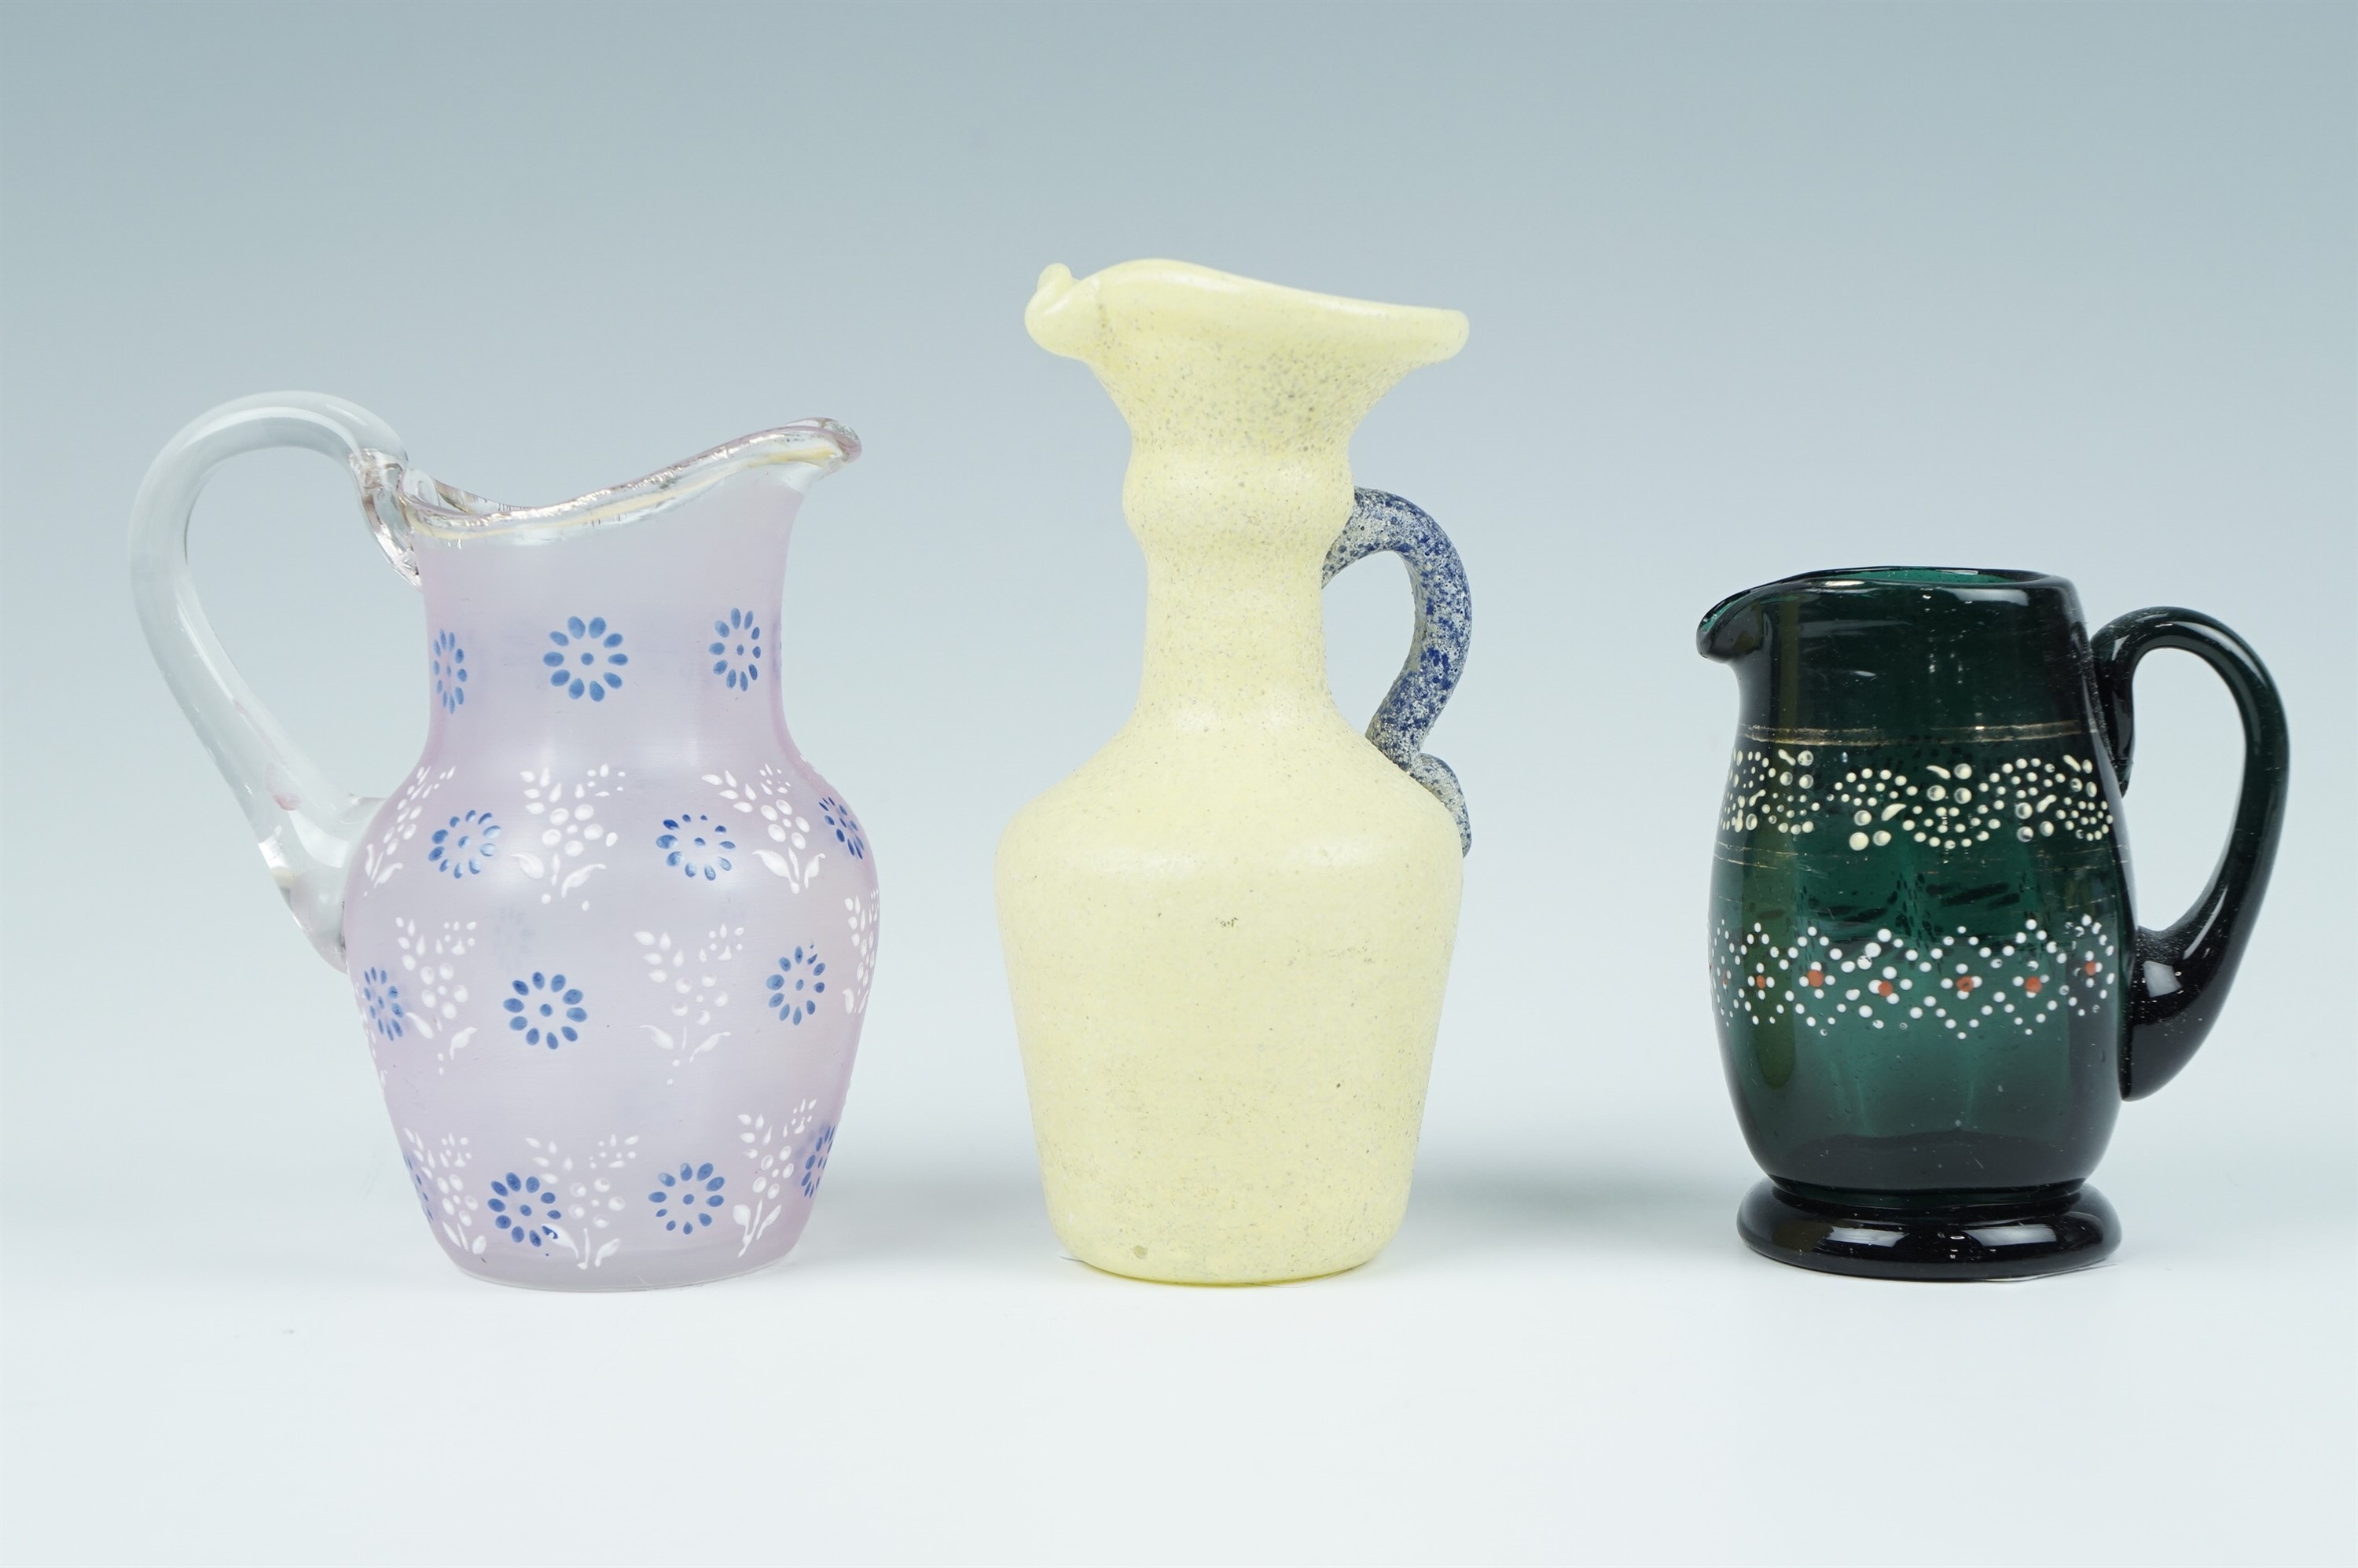 Three Victorian small glass jugs, two having jeweled enamel decoration and one having a speckled